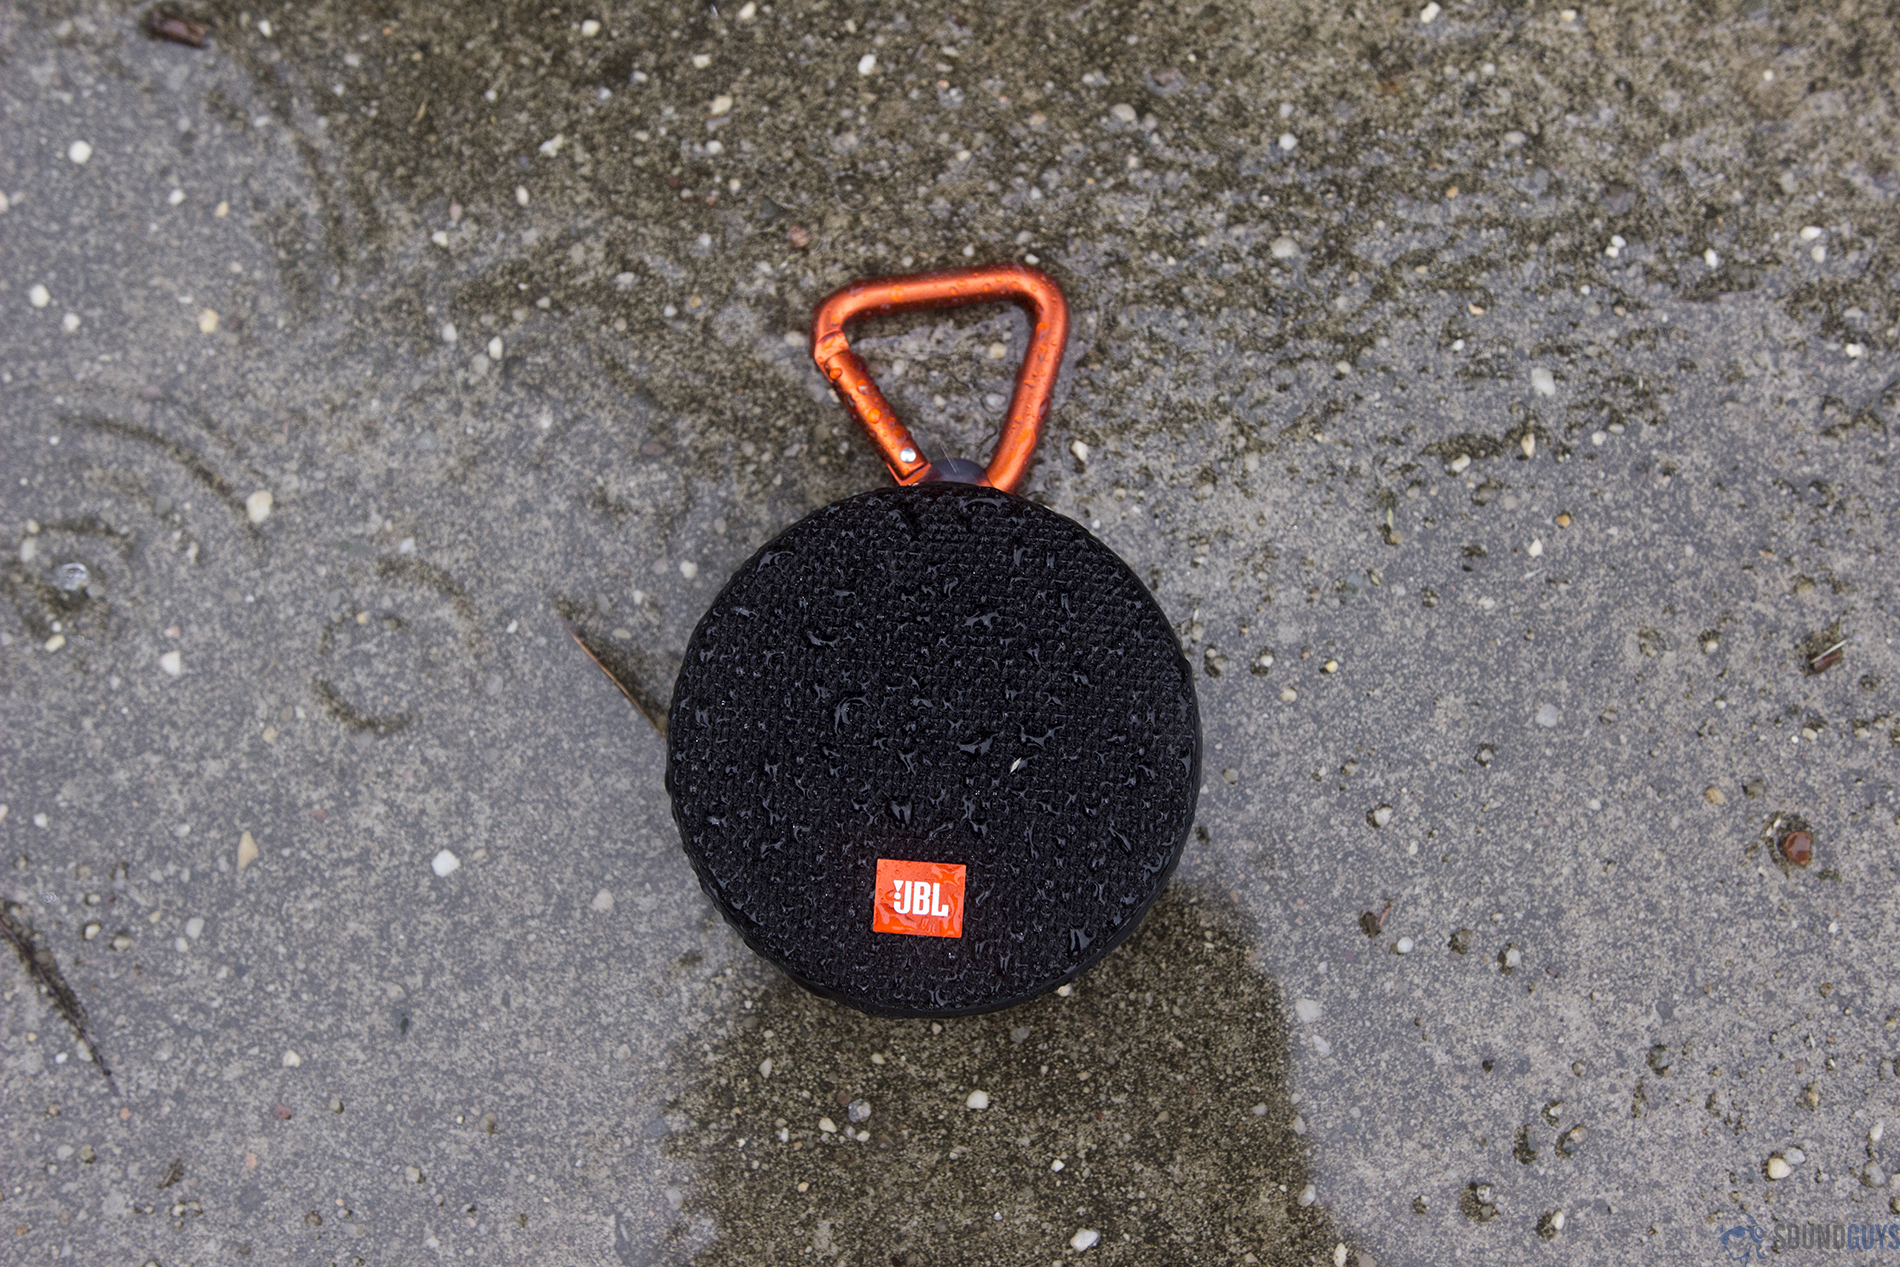 JBL Clip 2 review: Tiny Bluetooth speaker improves with full waterproofing,  boosted battery life - CNET